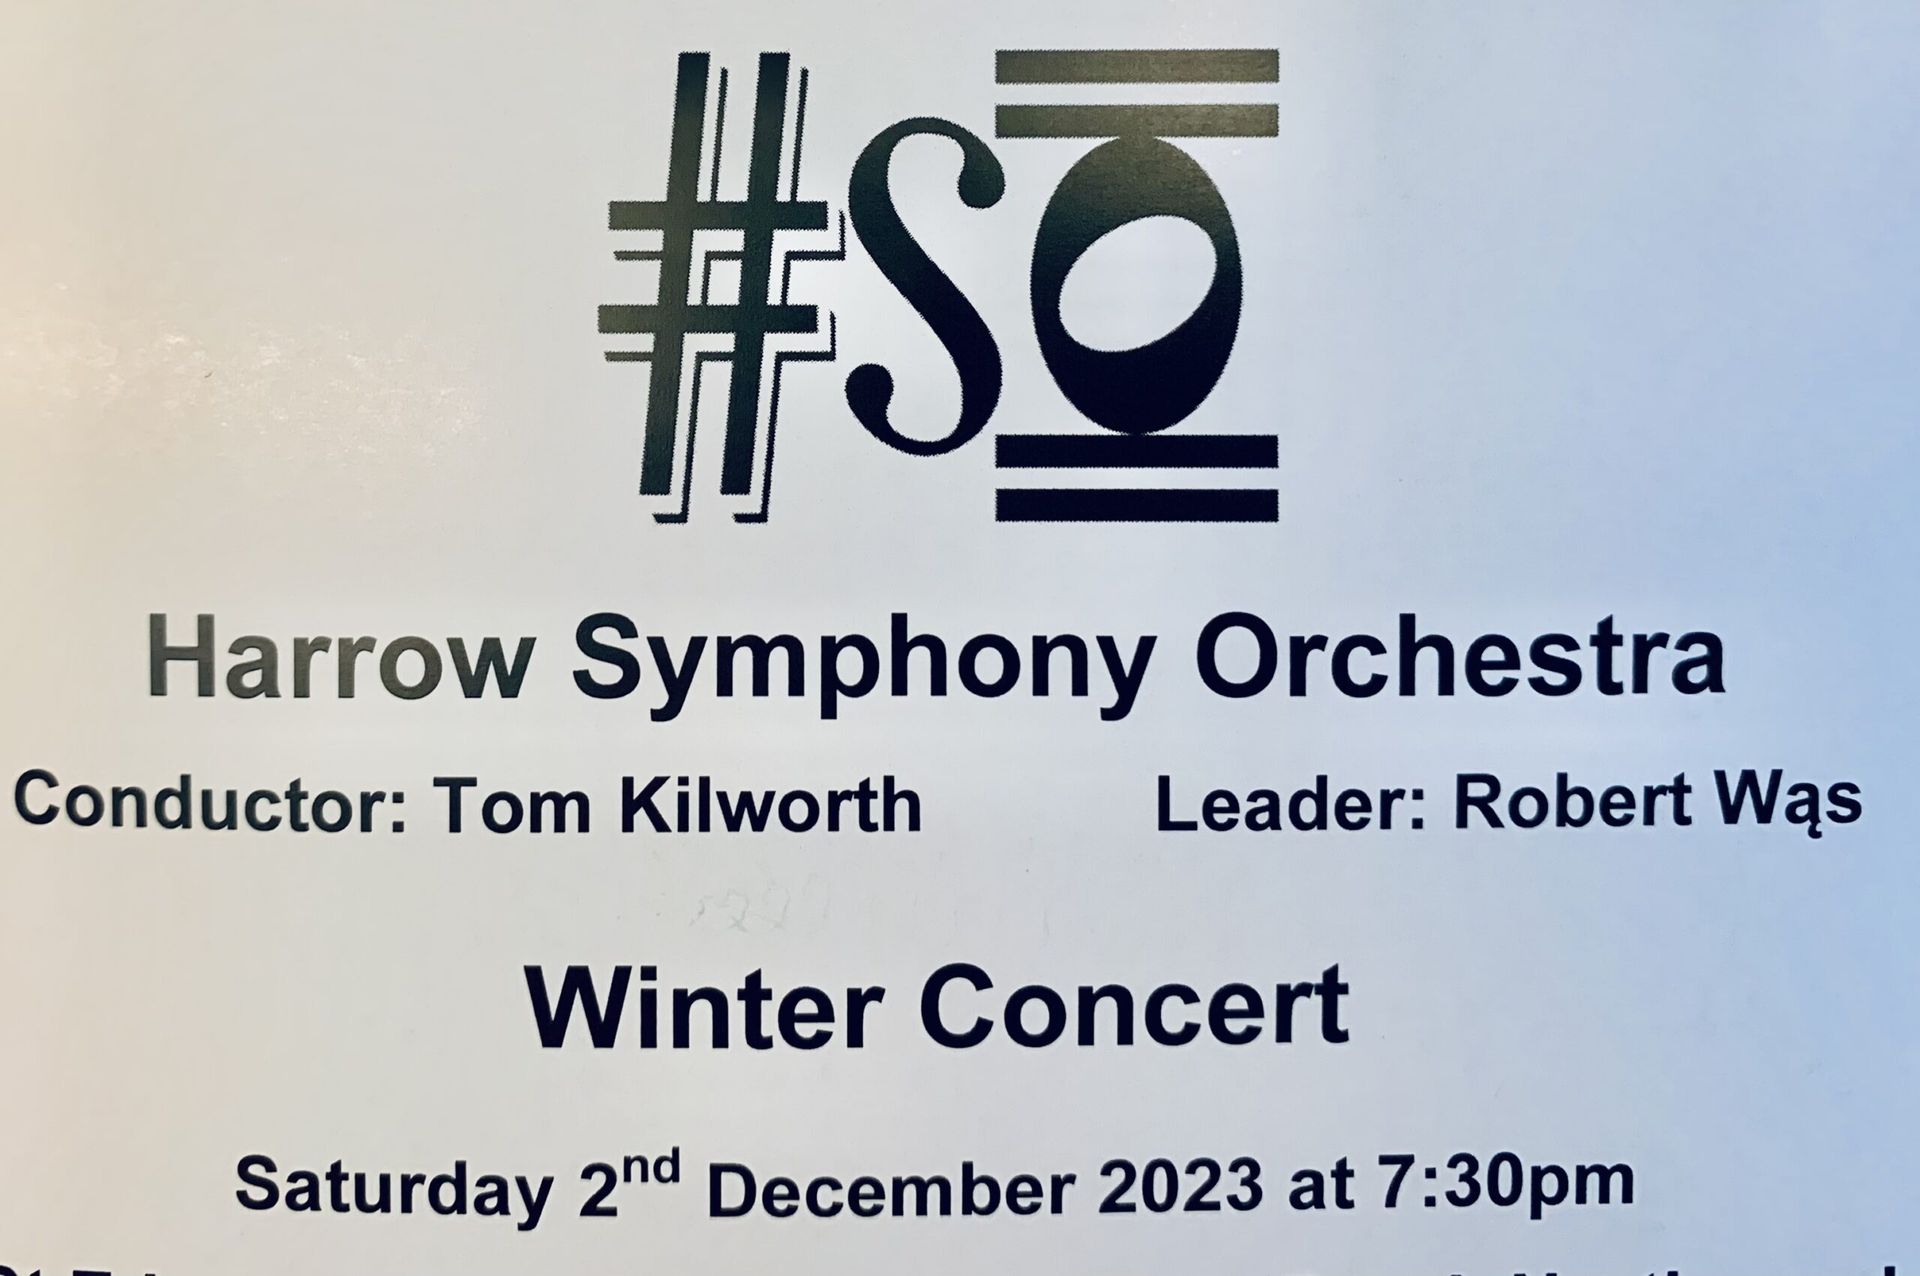 a poster for the harrow symphony orchestra winter concert